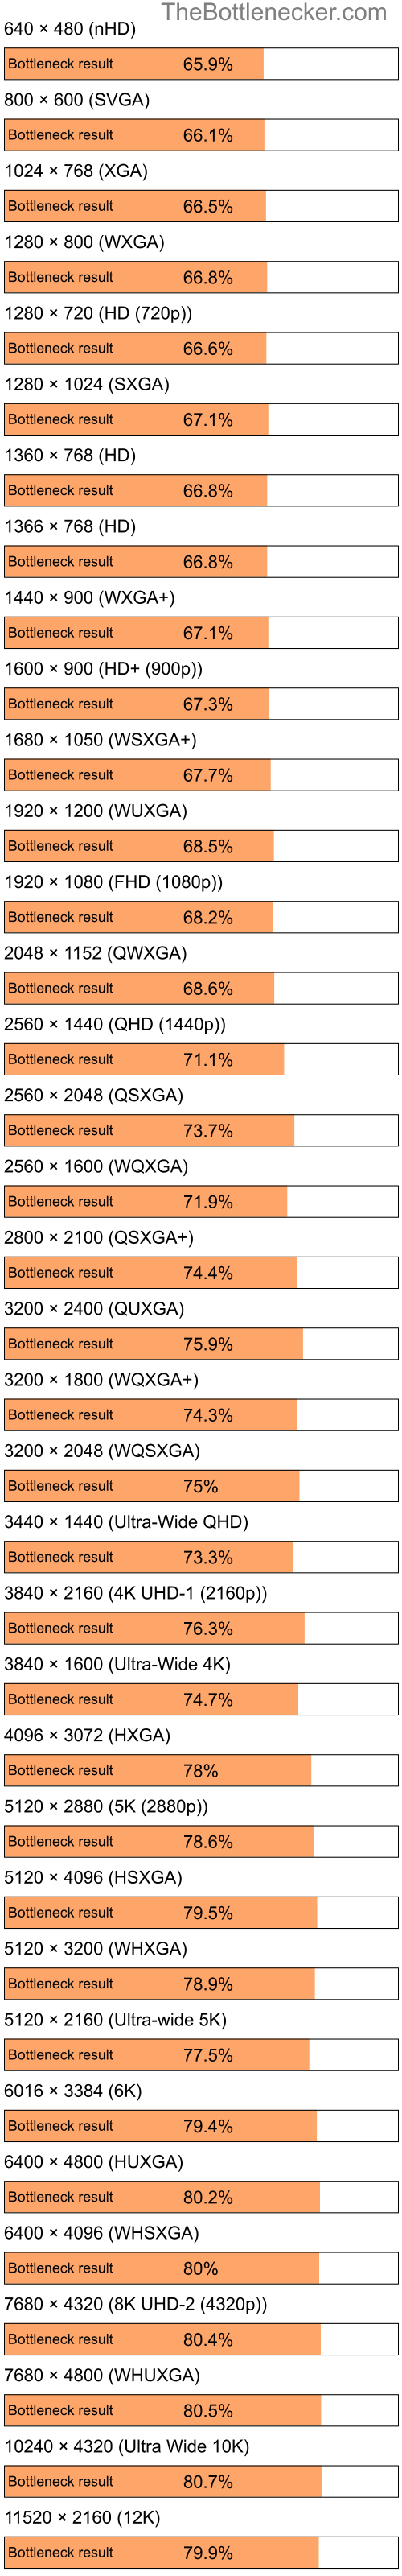 Bottleneck results by resolution for Intel Atom N280 and AMD Mobility Radeon HD 3430 in7 Days to Die